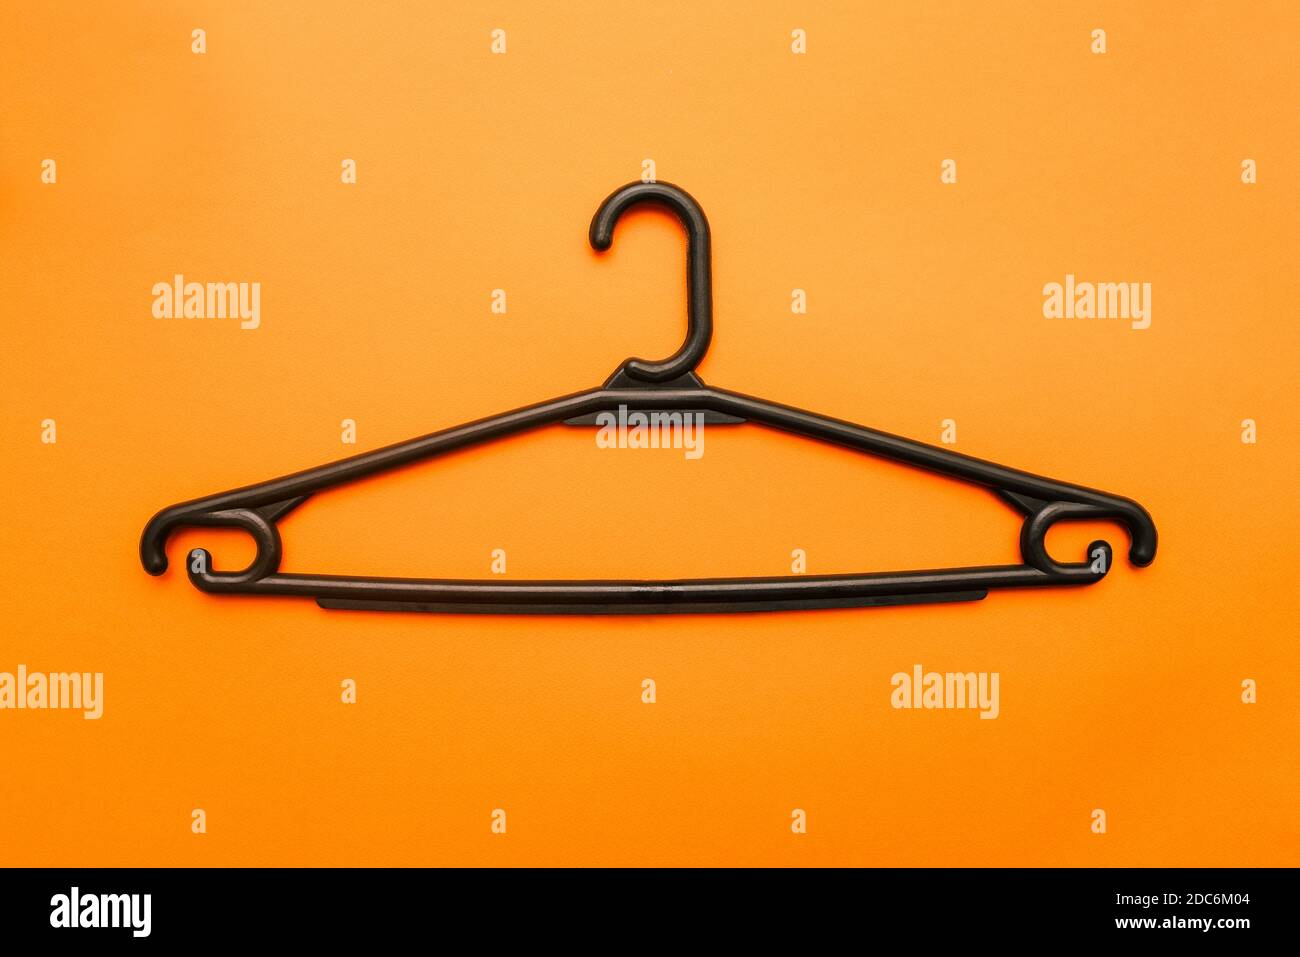 Black clothes hanger isolated on orange background. Empty plastic hanger for shop and home. Holder for shirts, coats, dresses and other items. Shoppin Stock Photo